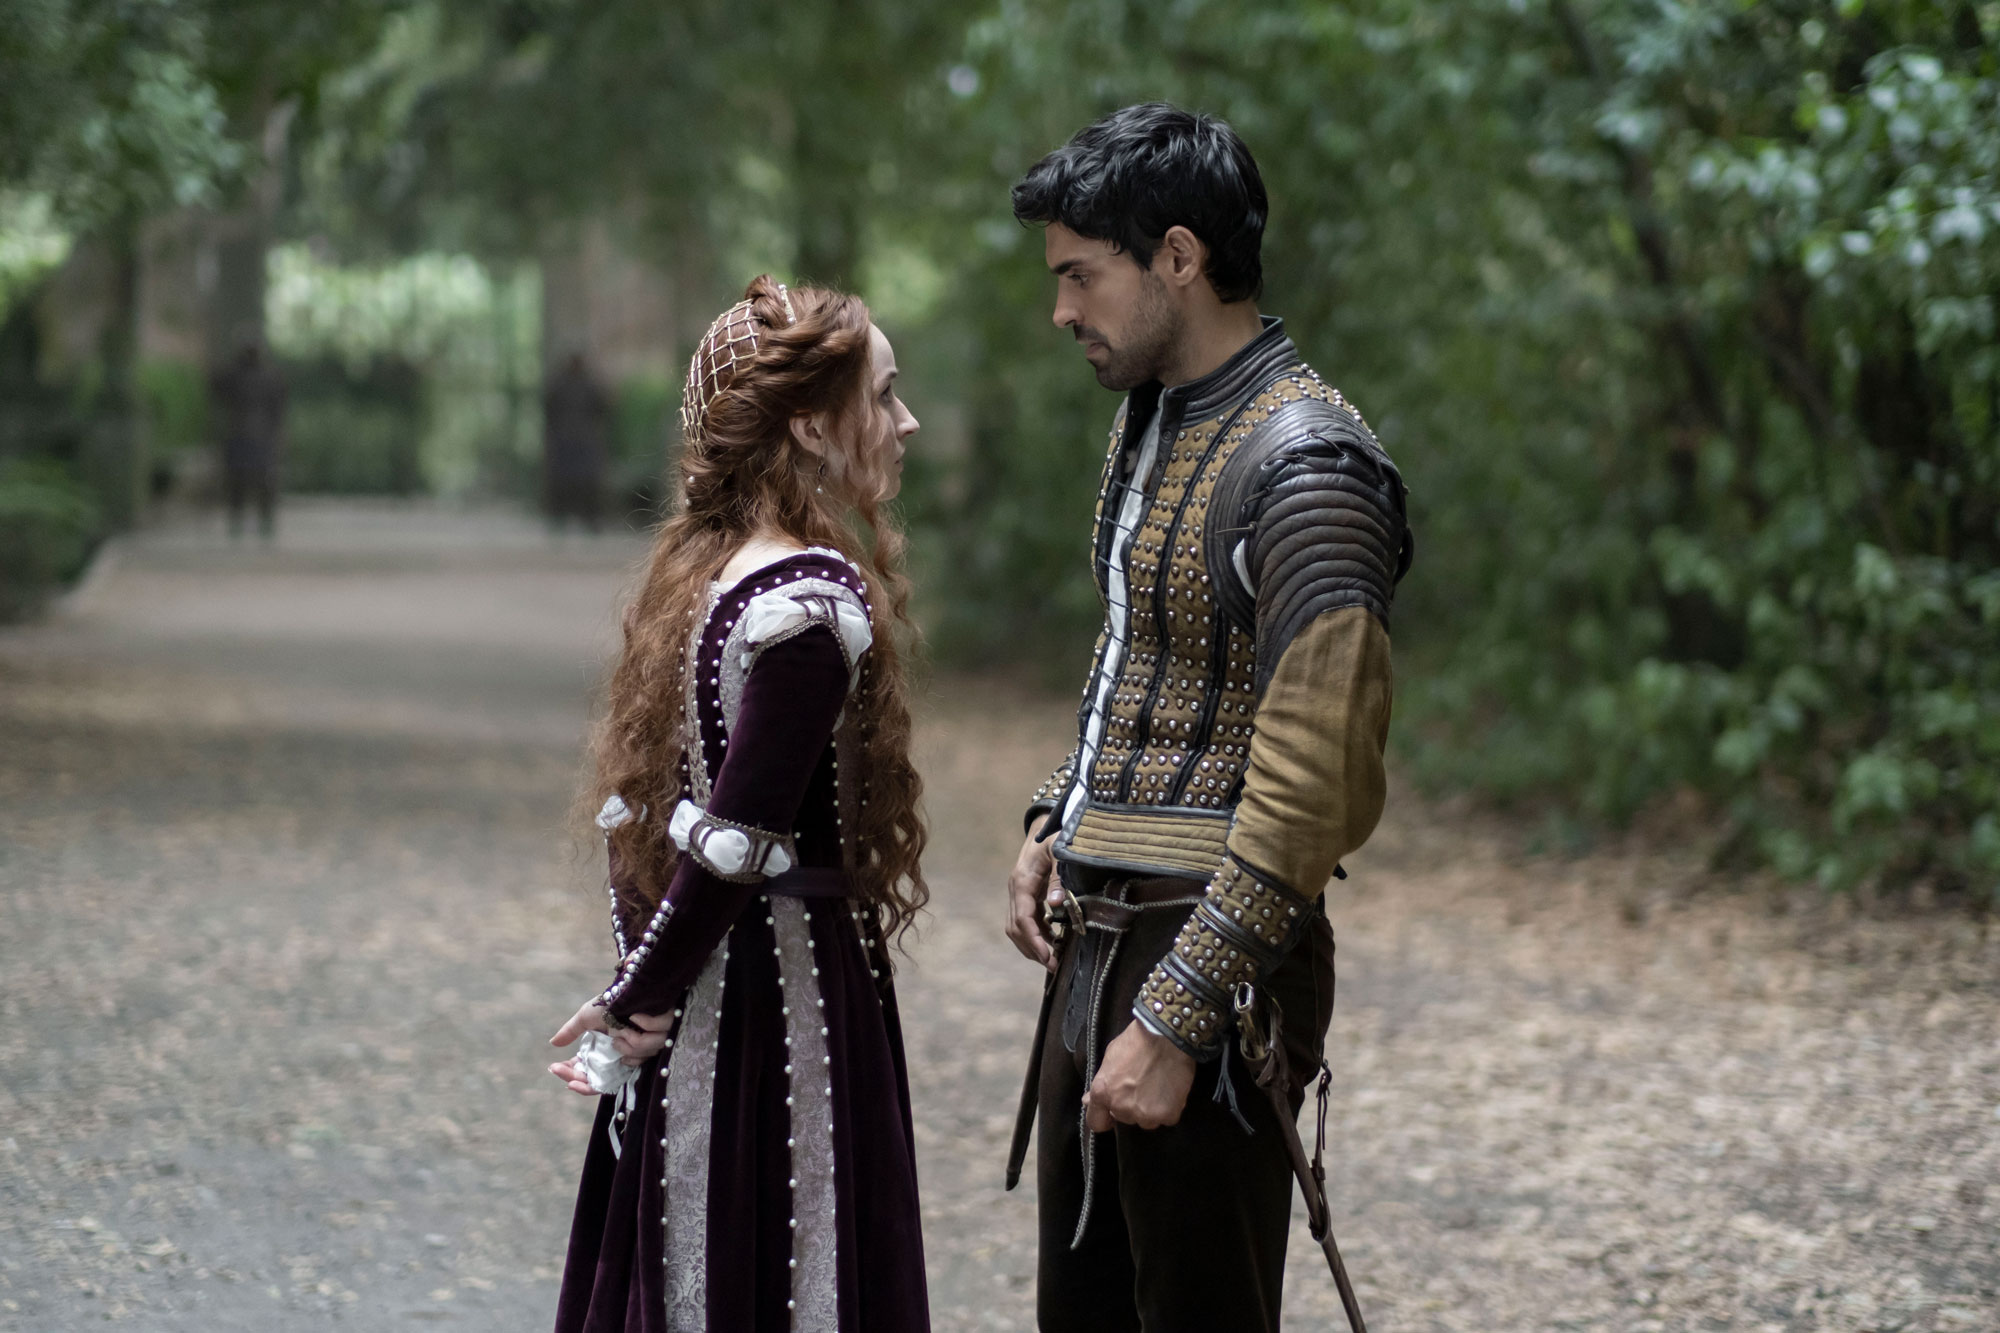 (L-R): Kaitlyn Dever as Rosaline and Sean Teale as Dario in 20th Century Studios' ROSALINE, exclusively on Hulu. Photo by Moris Puccio. © 2022 20th Century Studios. All Rights Reserved.